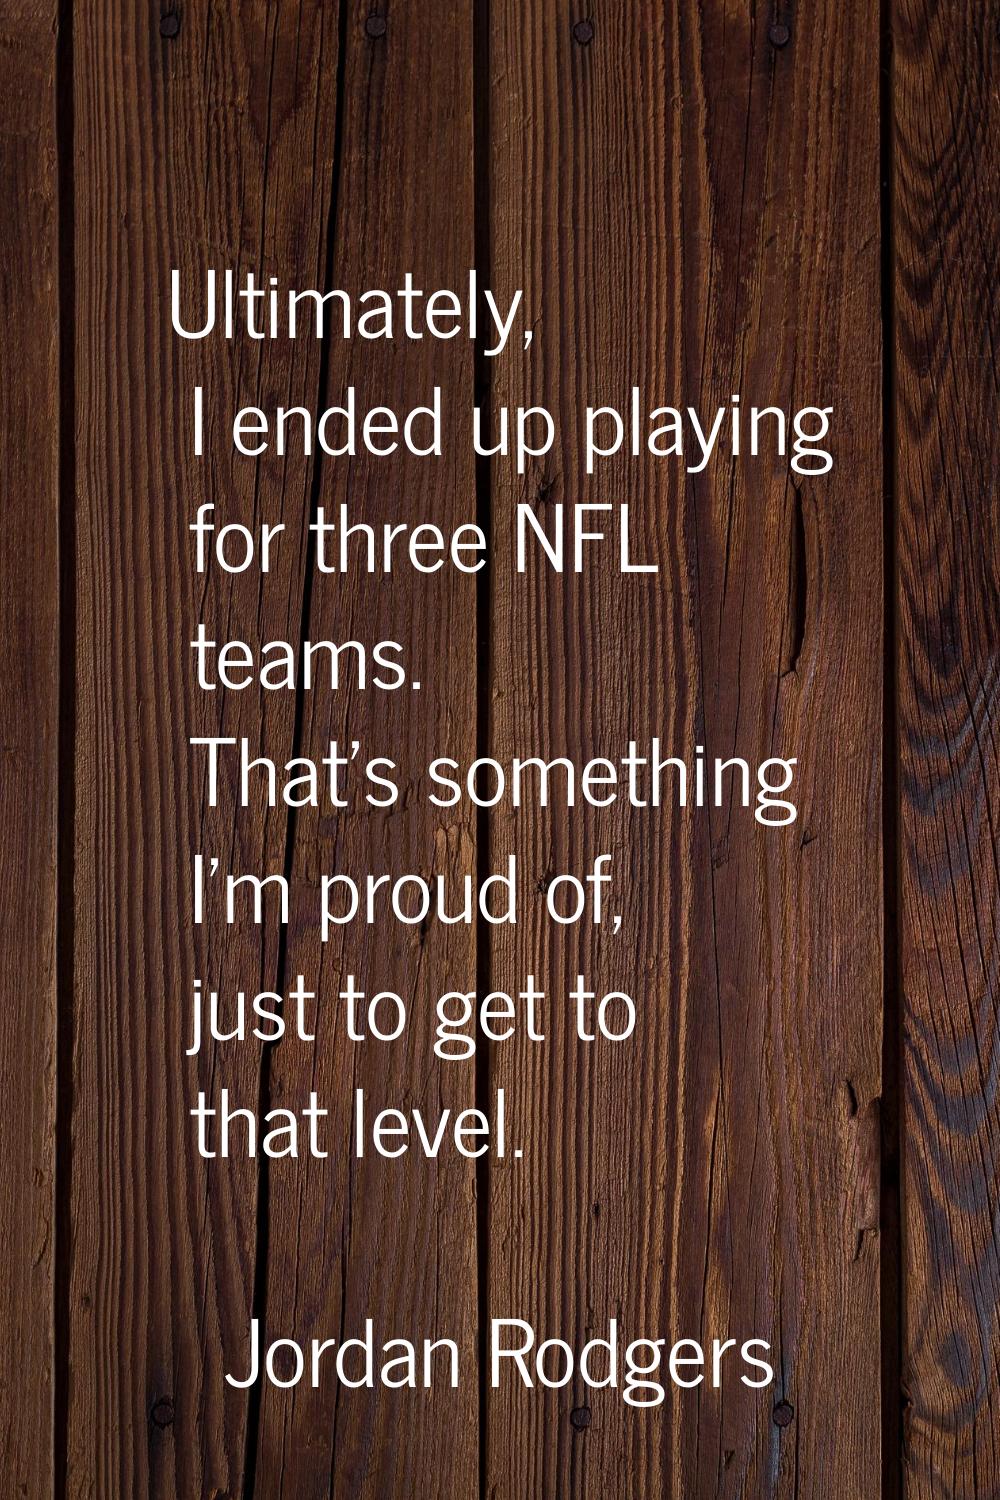 Ultimately, I ended up playing for three NFL teams. That's something I'm proud of, just to get to t